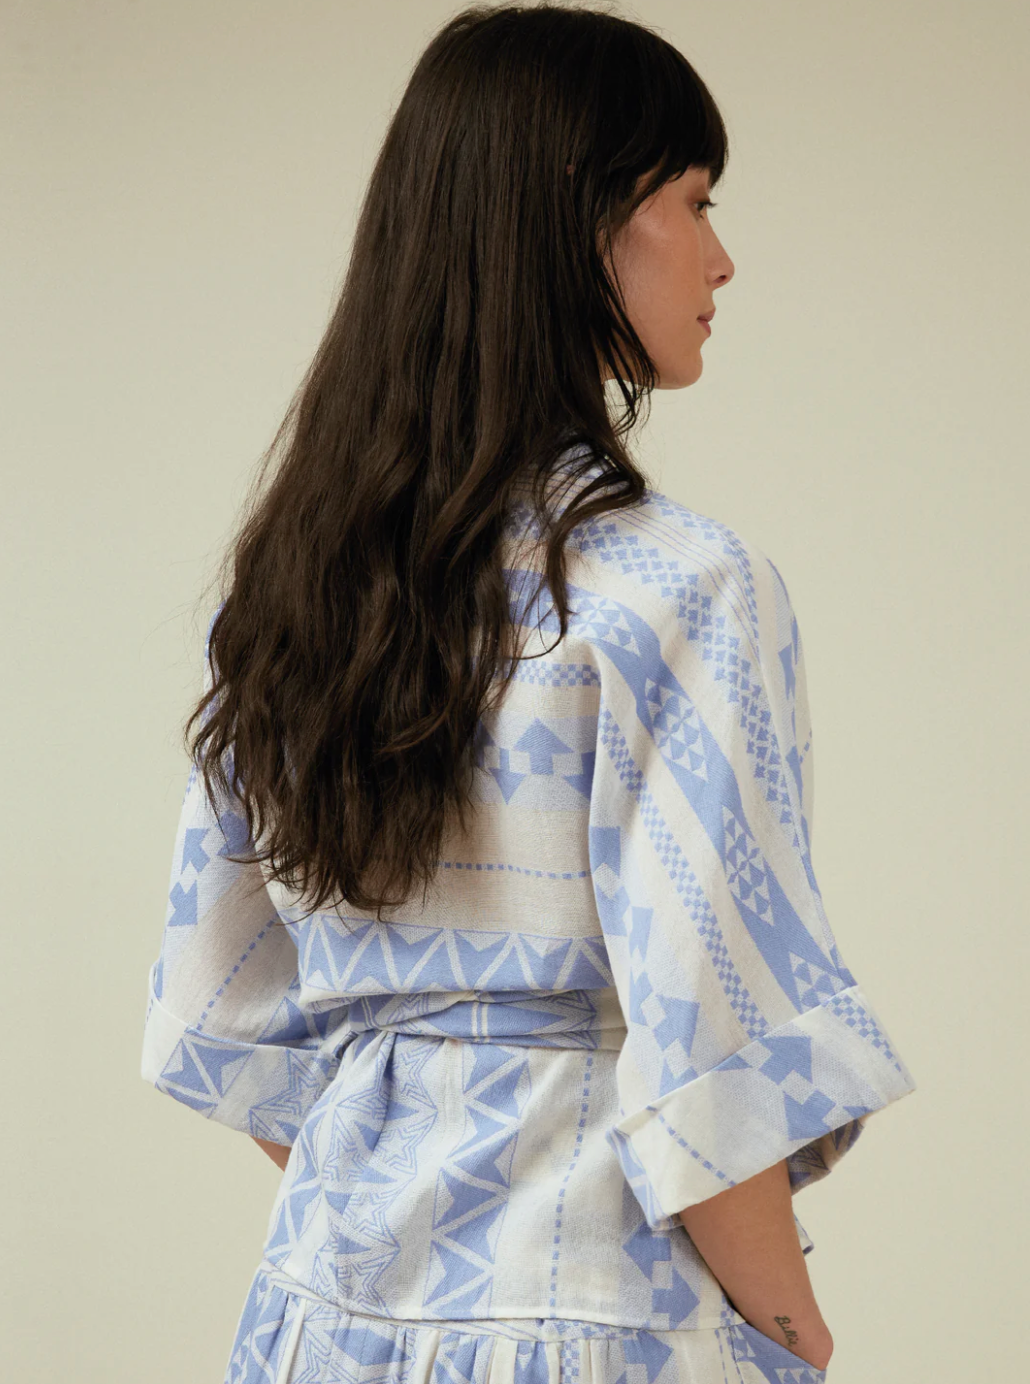 Woman weqaring Gloria blouse in blue and white by Tallulah & Hope.